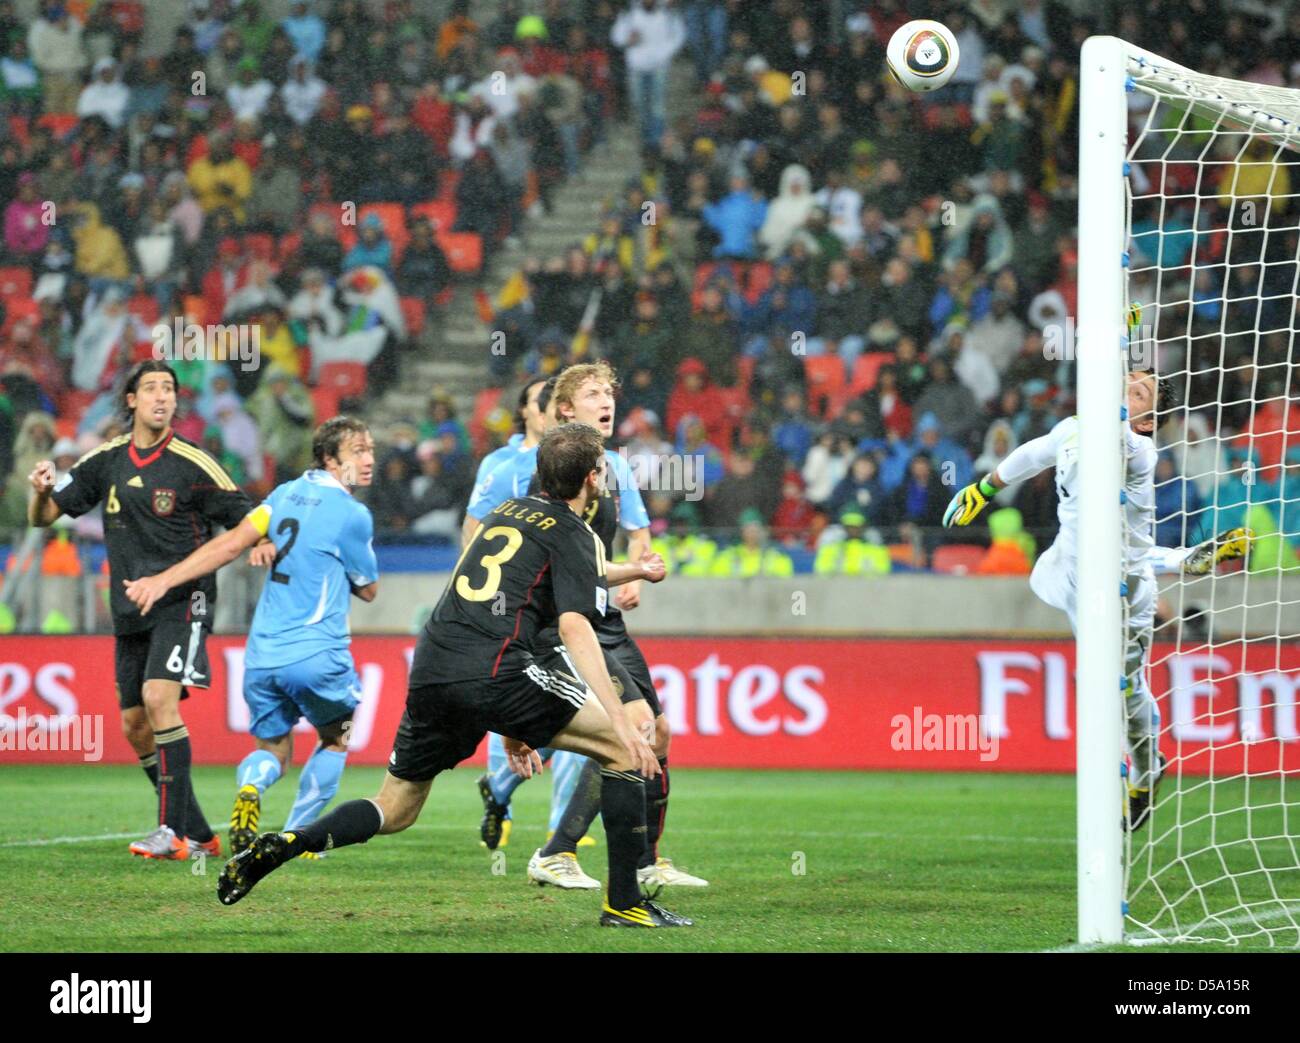 Sami Khedira (L) of Germany scores against goalkeeper Fernando Muslera (R) of Uruguay the 3-2 during the 2010 FIFA World Cup third place match between Uruguay and Germany at the Nelson Mandela Bay Stadium in Port Elizabeth, South Africa 10 July 2010. Photo: Bernd Weissbrod dpa - Please refer to http://dpaq.de/FIFA-WM2010-TC  +++(c) dpa - Bildfunk+++ Stock Photo